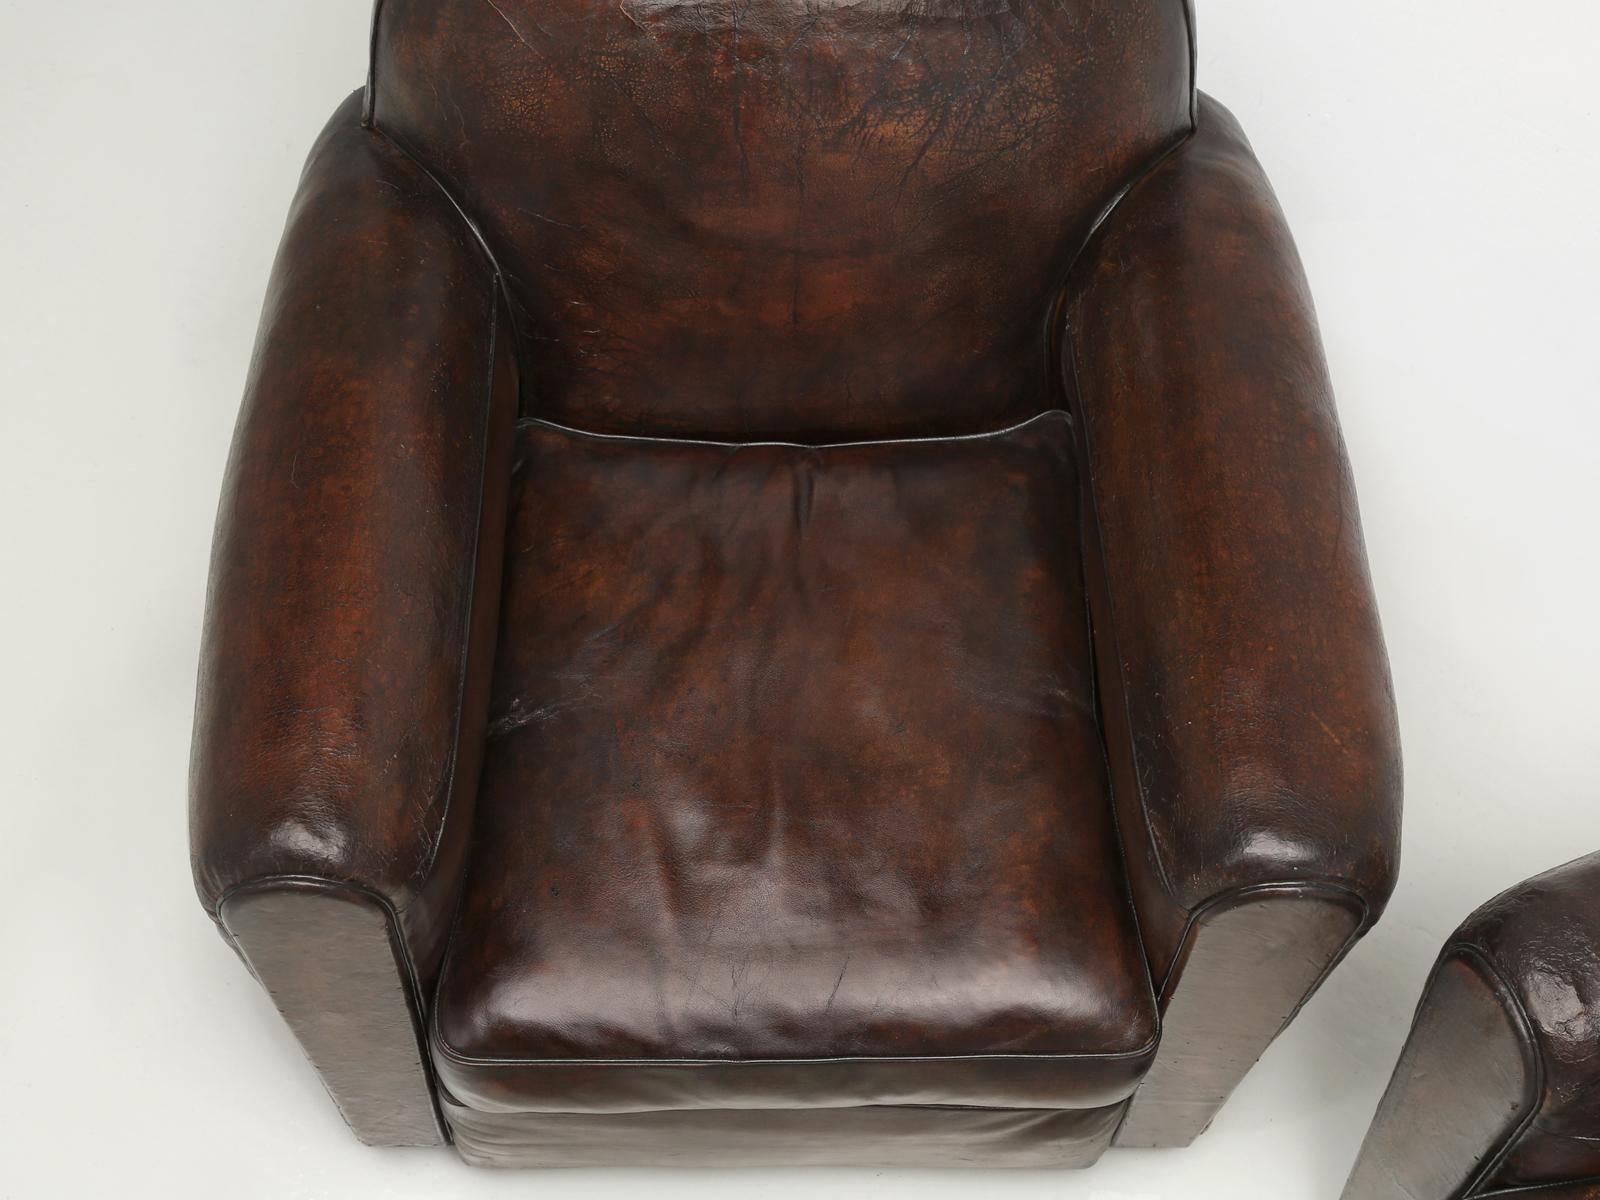 Hand-Crafted Pair of Leather French Club Chairs Completely Restored, Original Leather